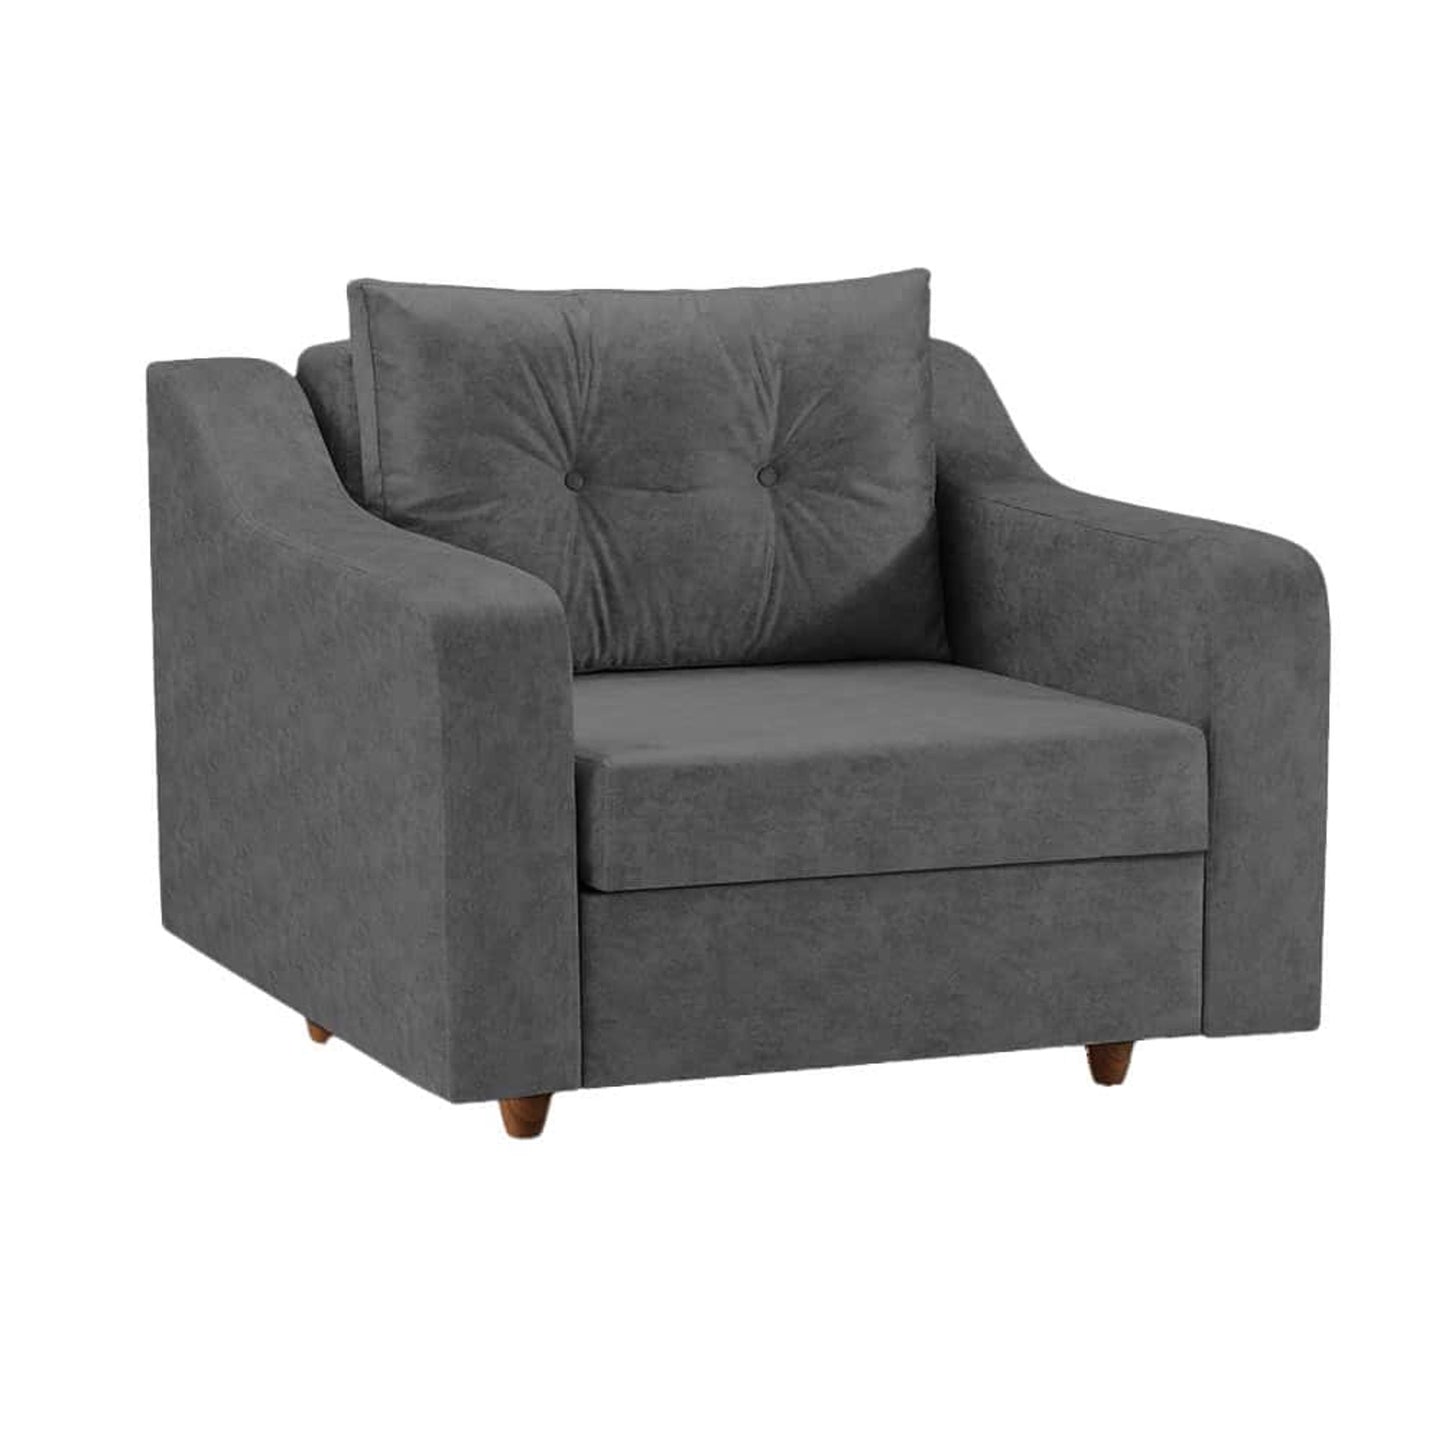 Leo Chair Bed in Dark Gray Fabric